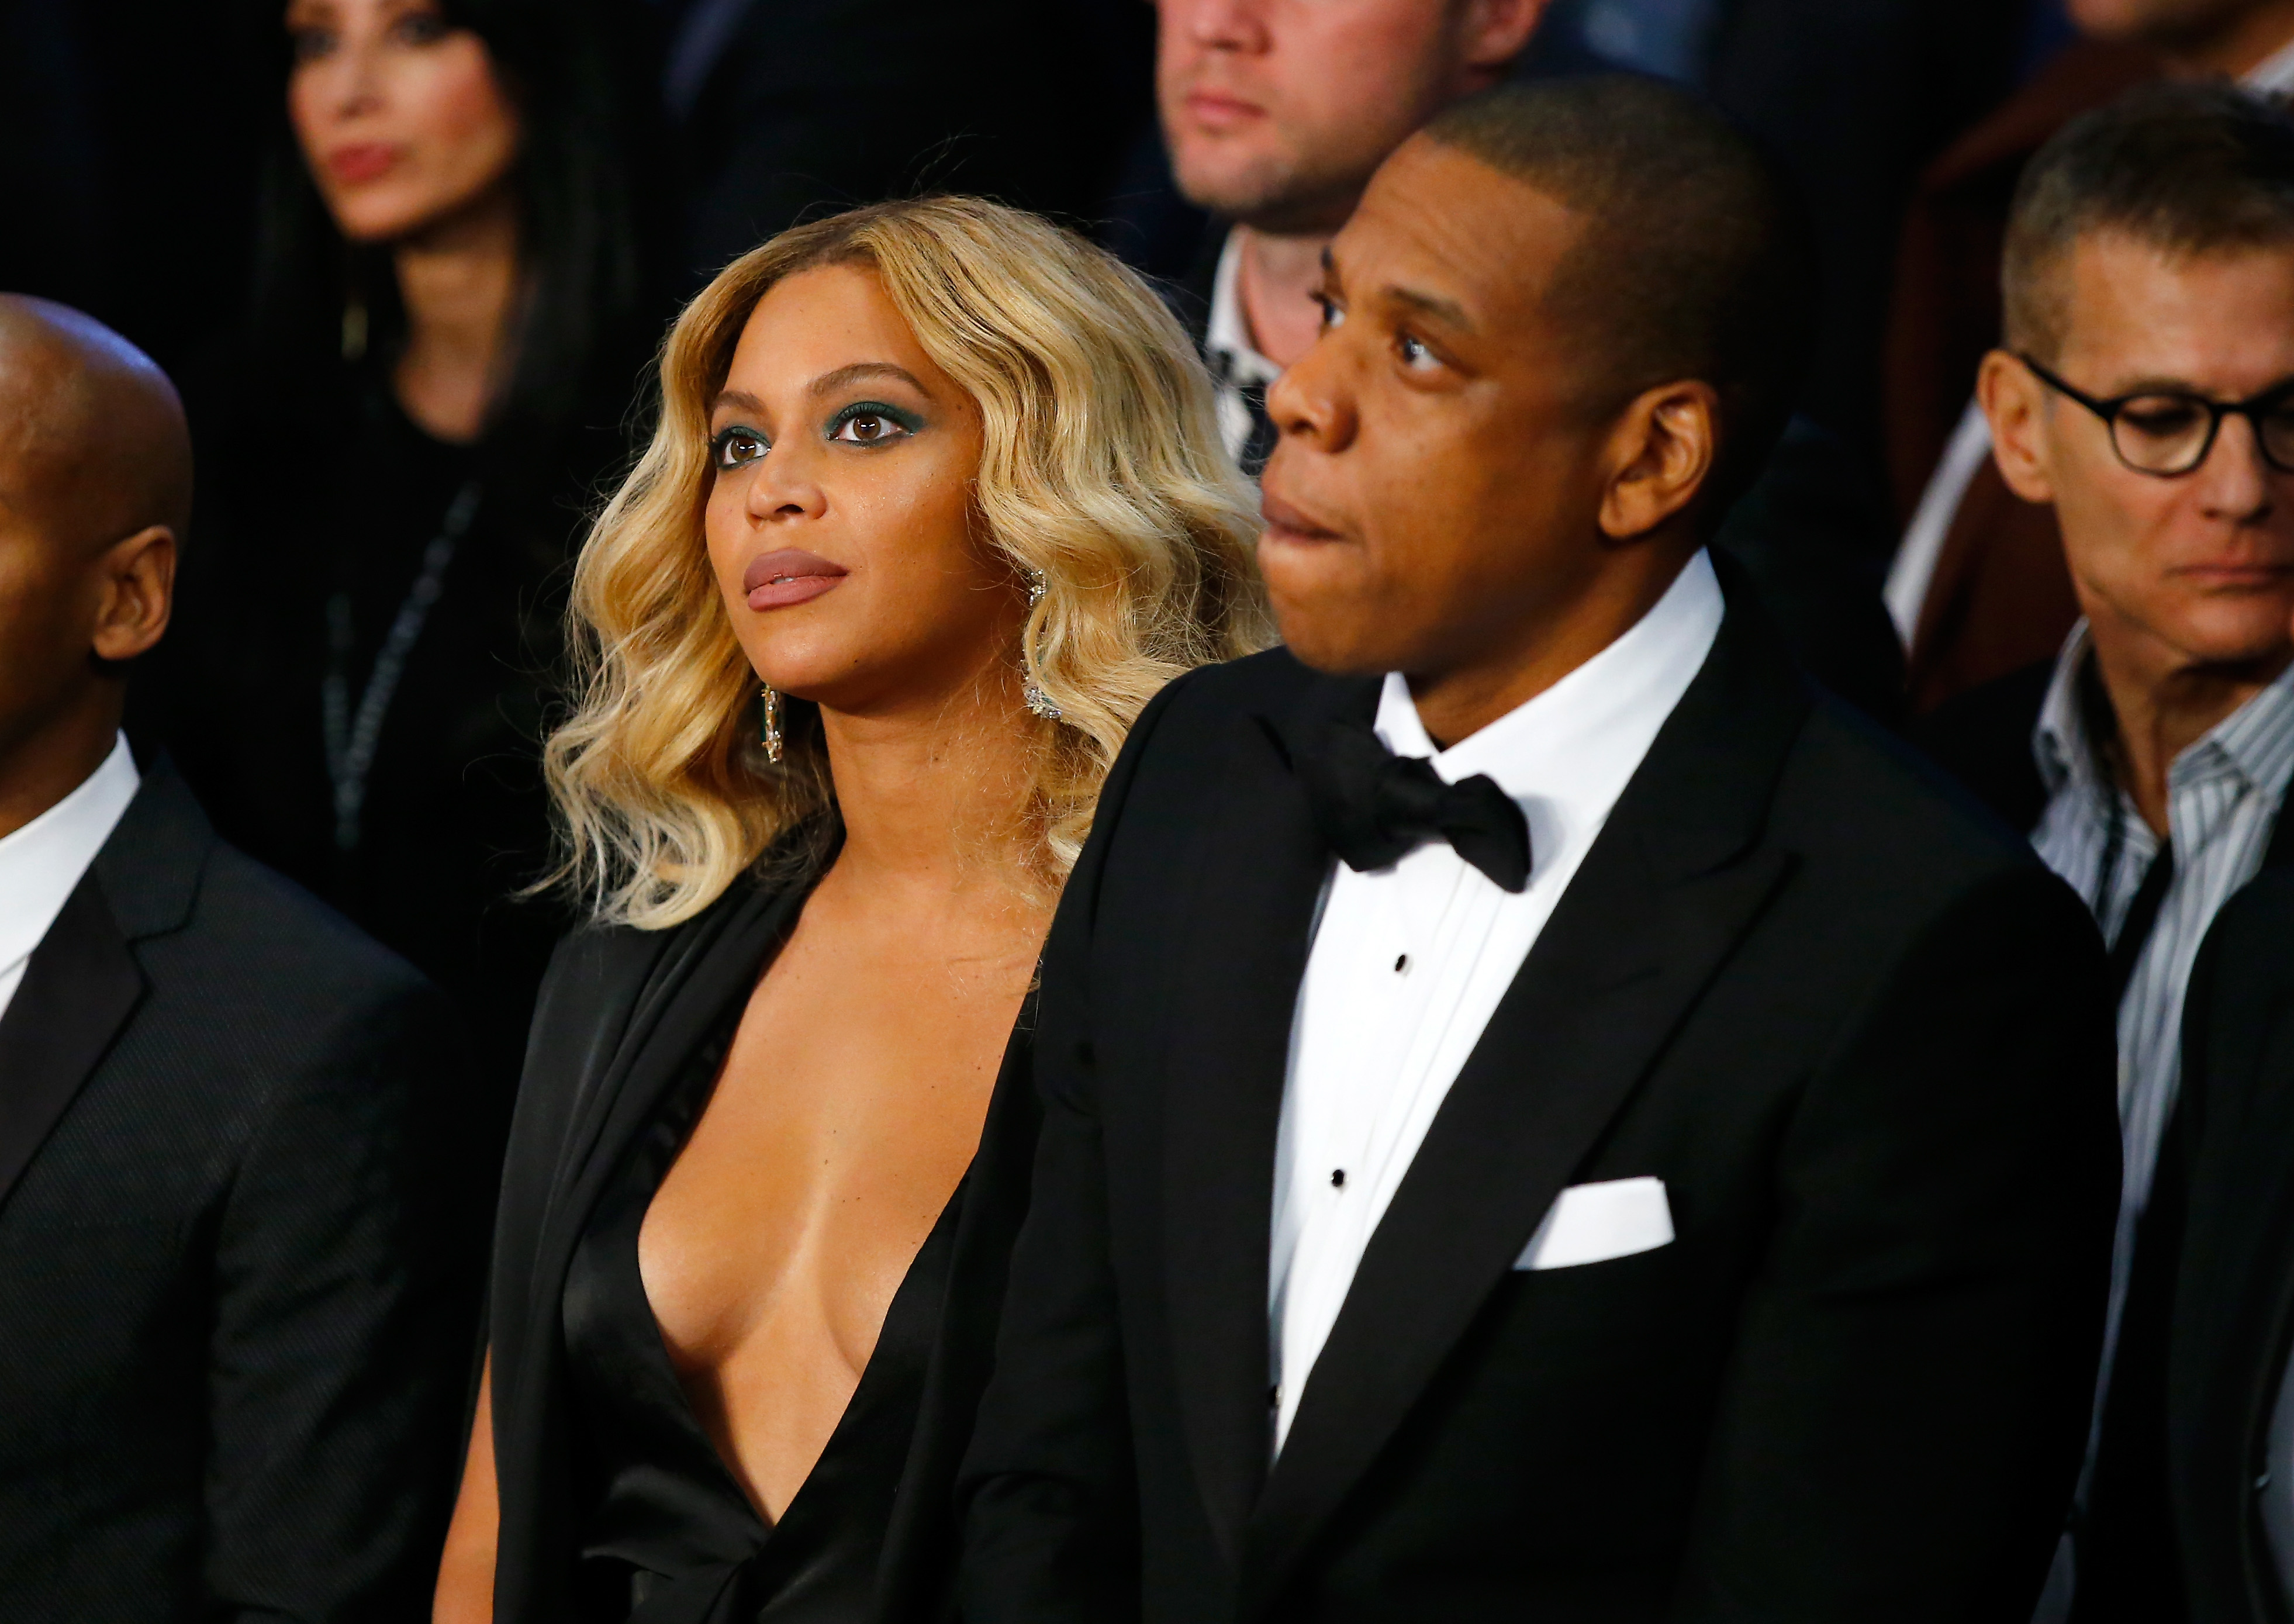 The Babies Beyoncé & Jay Z Held During The “On The Run II” Tour Aren’t Theirs